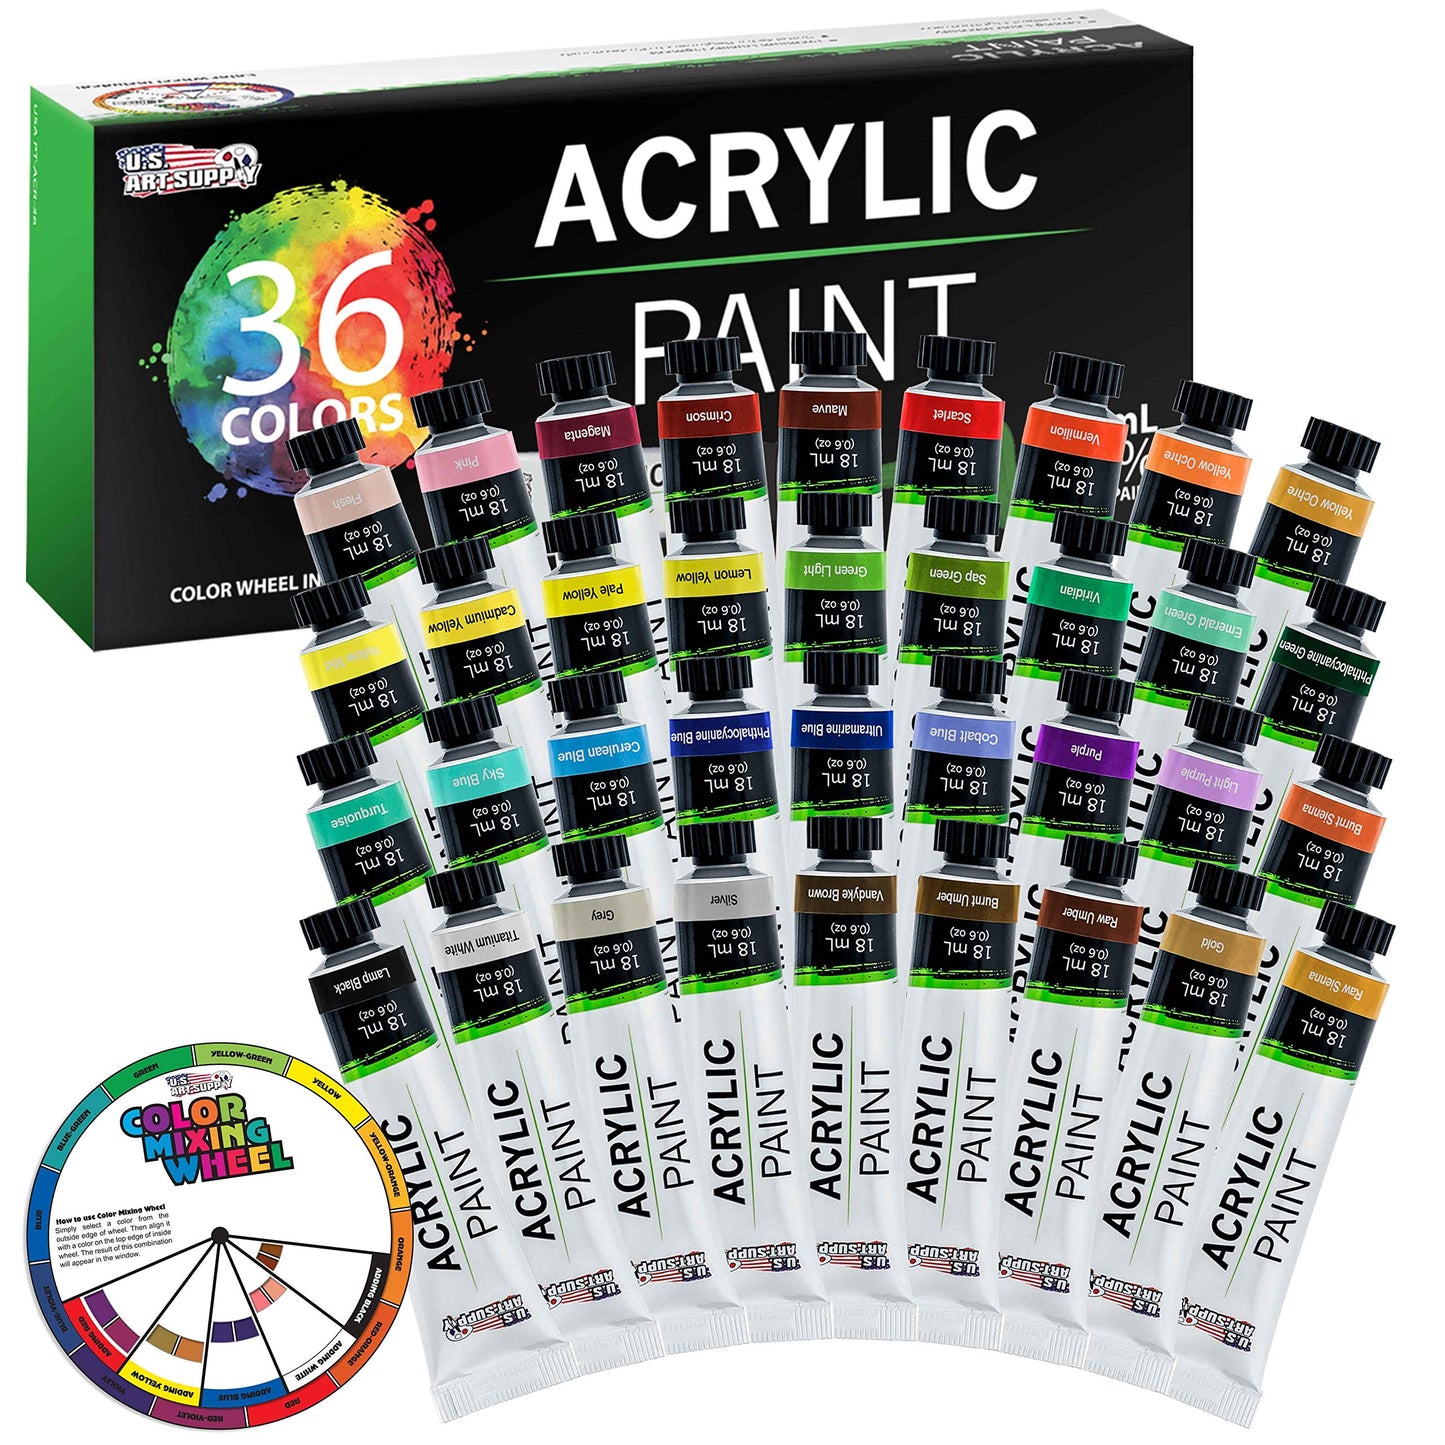 U.S. Art Supply Professional 36 Color Set of Acrylic Paint in Large 18ml Tubes - Rich Vivid Colors for Artists, Students, Beginners - Canvas Portrait